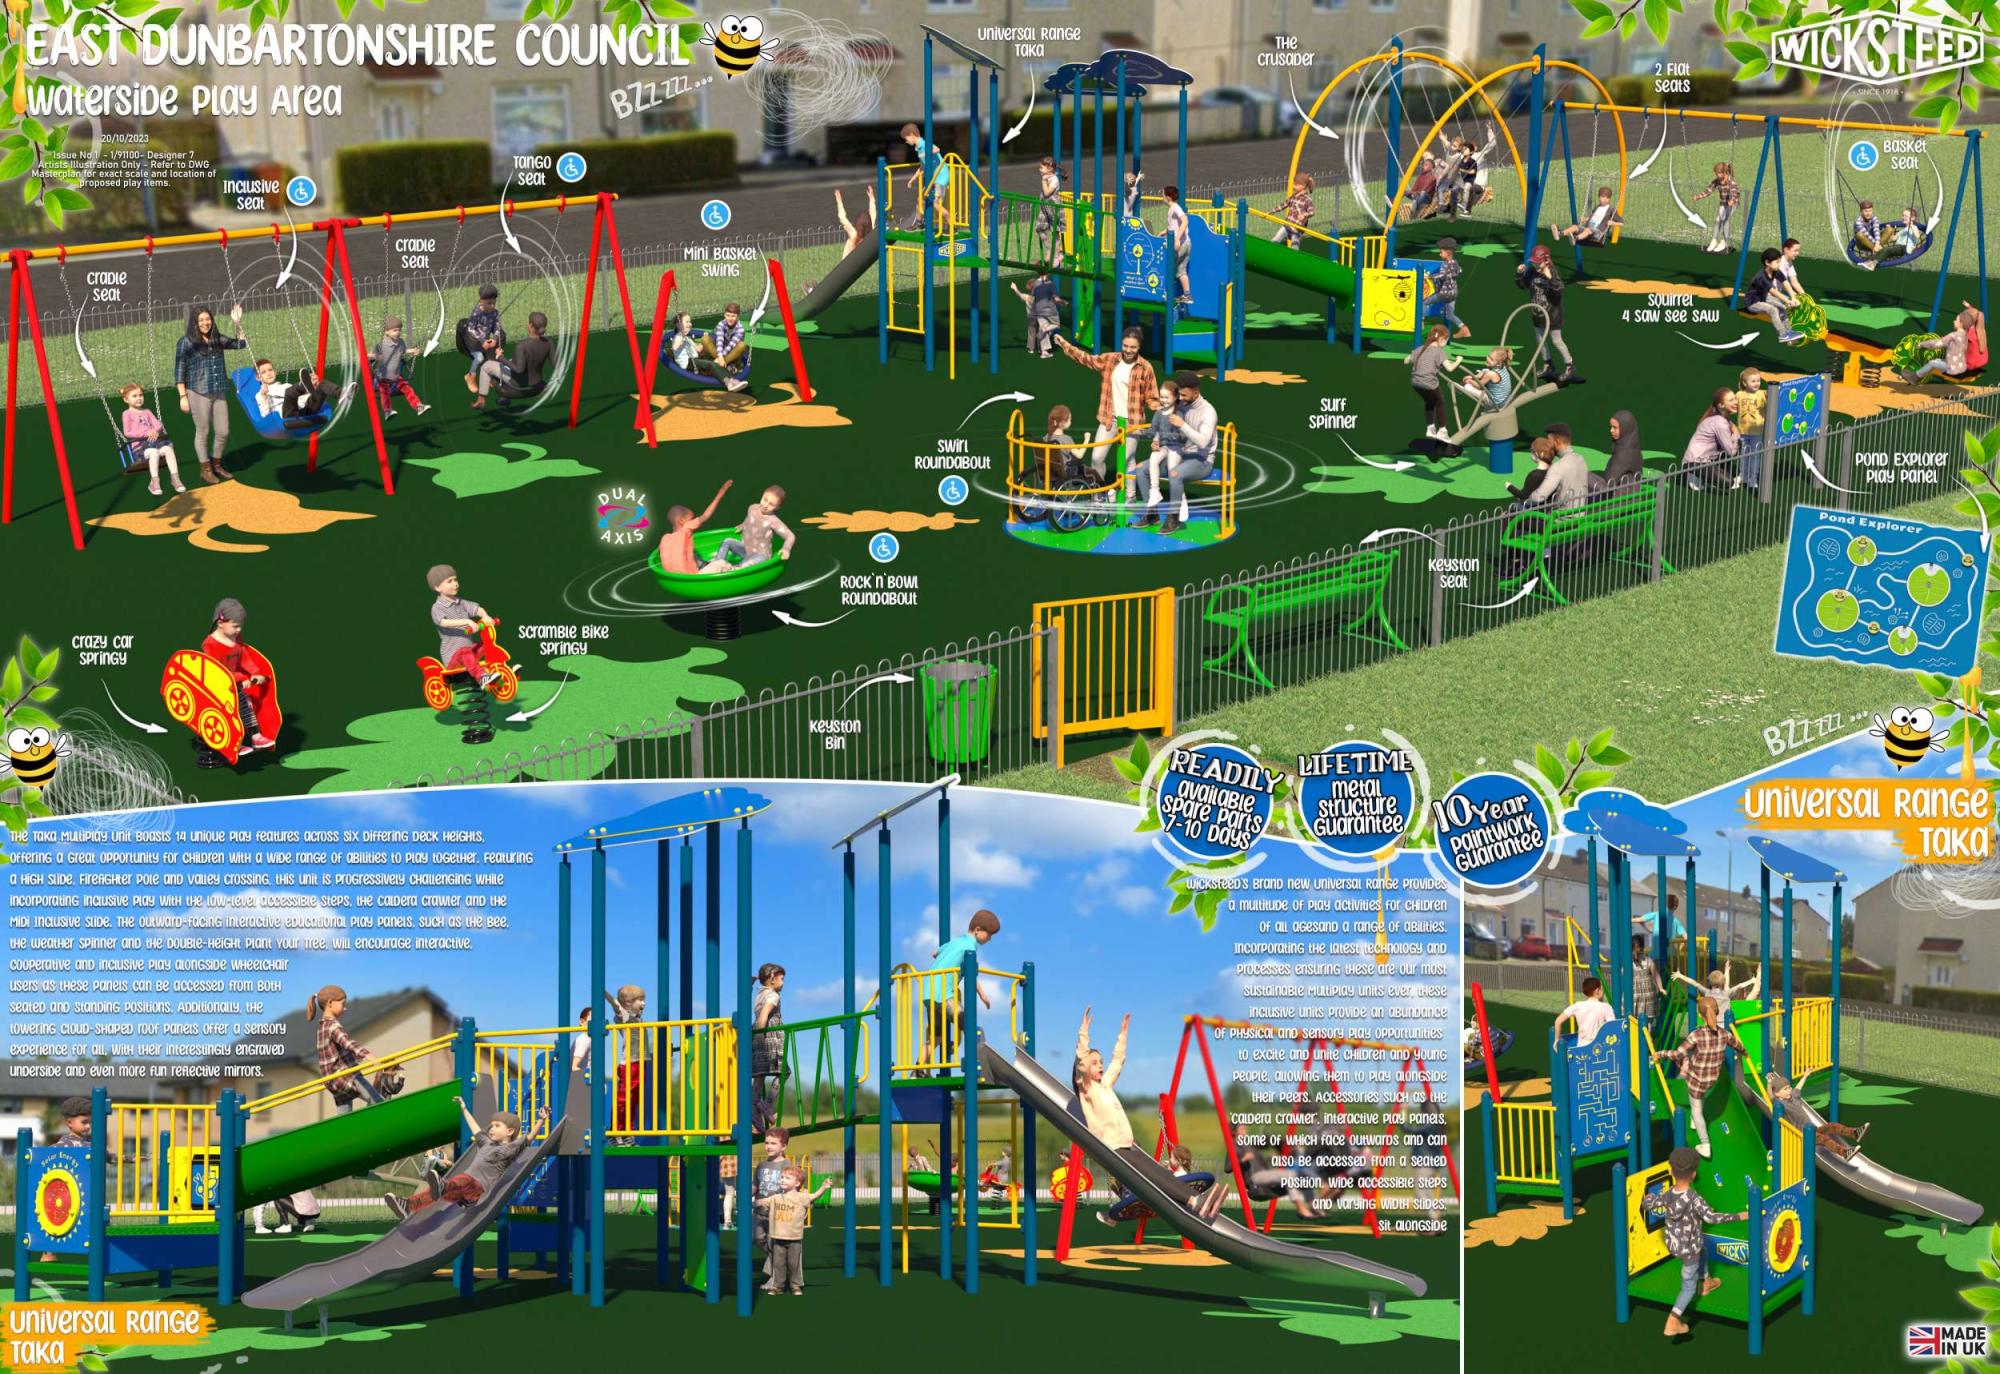 EAST DUNBARTONSHIRE COUNCIL waterside Play Area 20/10/2023 Issue No 1-1/91100- Designer 7 Artists Illustration Only - Refer to DWG Masterplan for exact scale and location of proposed play items.. TANGO seat BZZ ZZZ... craple seat crazy car Springy Inclusive seat craple Seat 0 0 0 0 0 0 Mini Basket Swing DUAL AXIS ROCK 'N BOWL ROUNDABOUT Scramble Bike Springy THE TAKA MultiPlay Unit Boasts 14 unique play features across six Differing Deck HEIGHTS, Offering a Great Opportunity for CHILDren with a wide range of abilities to play together. Featuring A HIGH SLIDE. FirefiGHter Pole and valley crossing, this unit is progressively CHALLENGING WHILE incorporating inclusive Play With the low-level accessible Steps, the caldera crawler and the MIDI Inclusive SLIDE. THE Outward-facing interactive educational play panels, SUCH as the Bеe. the weather spinner and the DOUBLE-HEIGHt Plant Your Tree, will encourage interactive. COOperative and inclusive play aLONGSIDE WHEELCHair users as these panels can be accessed from BotH seated and standing Positions. ADDitionally, the towering CLOUD-SHAPED roof Panels offer a sensory experience for all, with their interestingly engraved underside and even more fun reflective mirrors. Selar Energy Universal Range τακα ROM JAD Keyston Bin universal Range τακα THE crusader 2 Flat seats Swirl ROUNDABOUT surf Spinner Squirrel 4 saw see SAW WICKSTEED SINCE 1918 Basket seat Keyston seat Ո POND EXPLOrer Play Panel Pond Explorer READILY available Spare Parts 7-10 DAYS LIFETIME metal Structure Guarantee Year Wicksteep's Brand new universal Range Provides a multitude of Play activities for CHILDren Of all agesand a range of abilities. Incorporating the latest tеCHNOLOGY AND Processes ensuring these are our most Sustainable Multiplay units ever, these inclusive units provide an abundance OF PHYSICAL and sensory play opportunities to excite and unite CHILDren and young People, allowing them to Play ALONGSIDE their peers. Accessories such as the caldera crawler, interactive play panels. Some of WHICH face outwards and can ALSO Bе accessed from a seated Position, wide accessible steps and varying WIDTH SLIDES. Sit alongside Paintwork Guarantee Universal Range